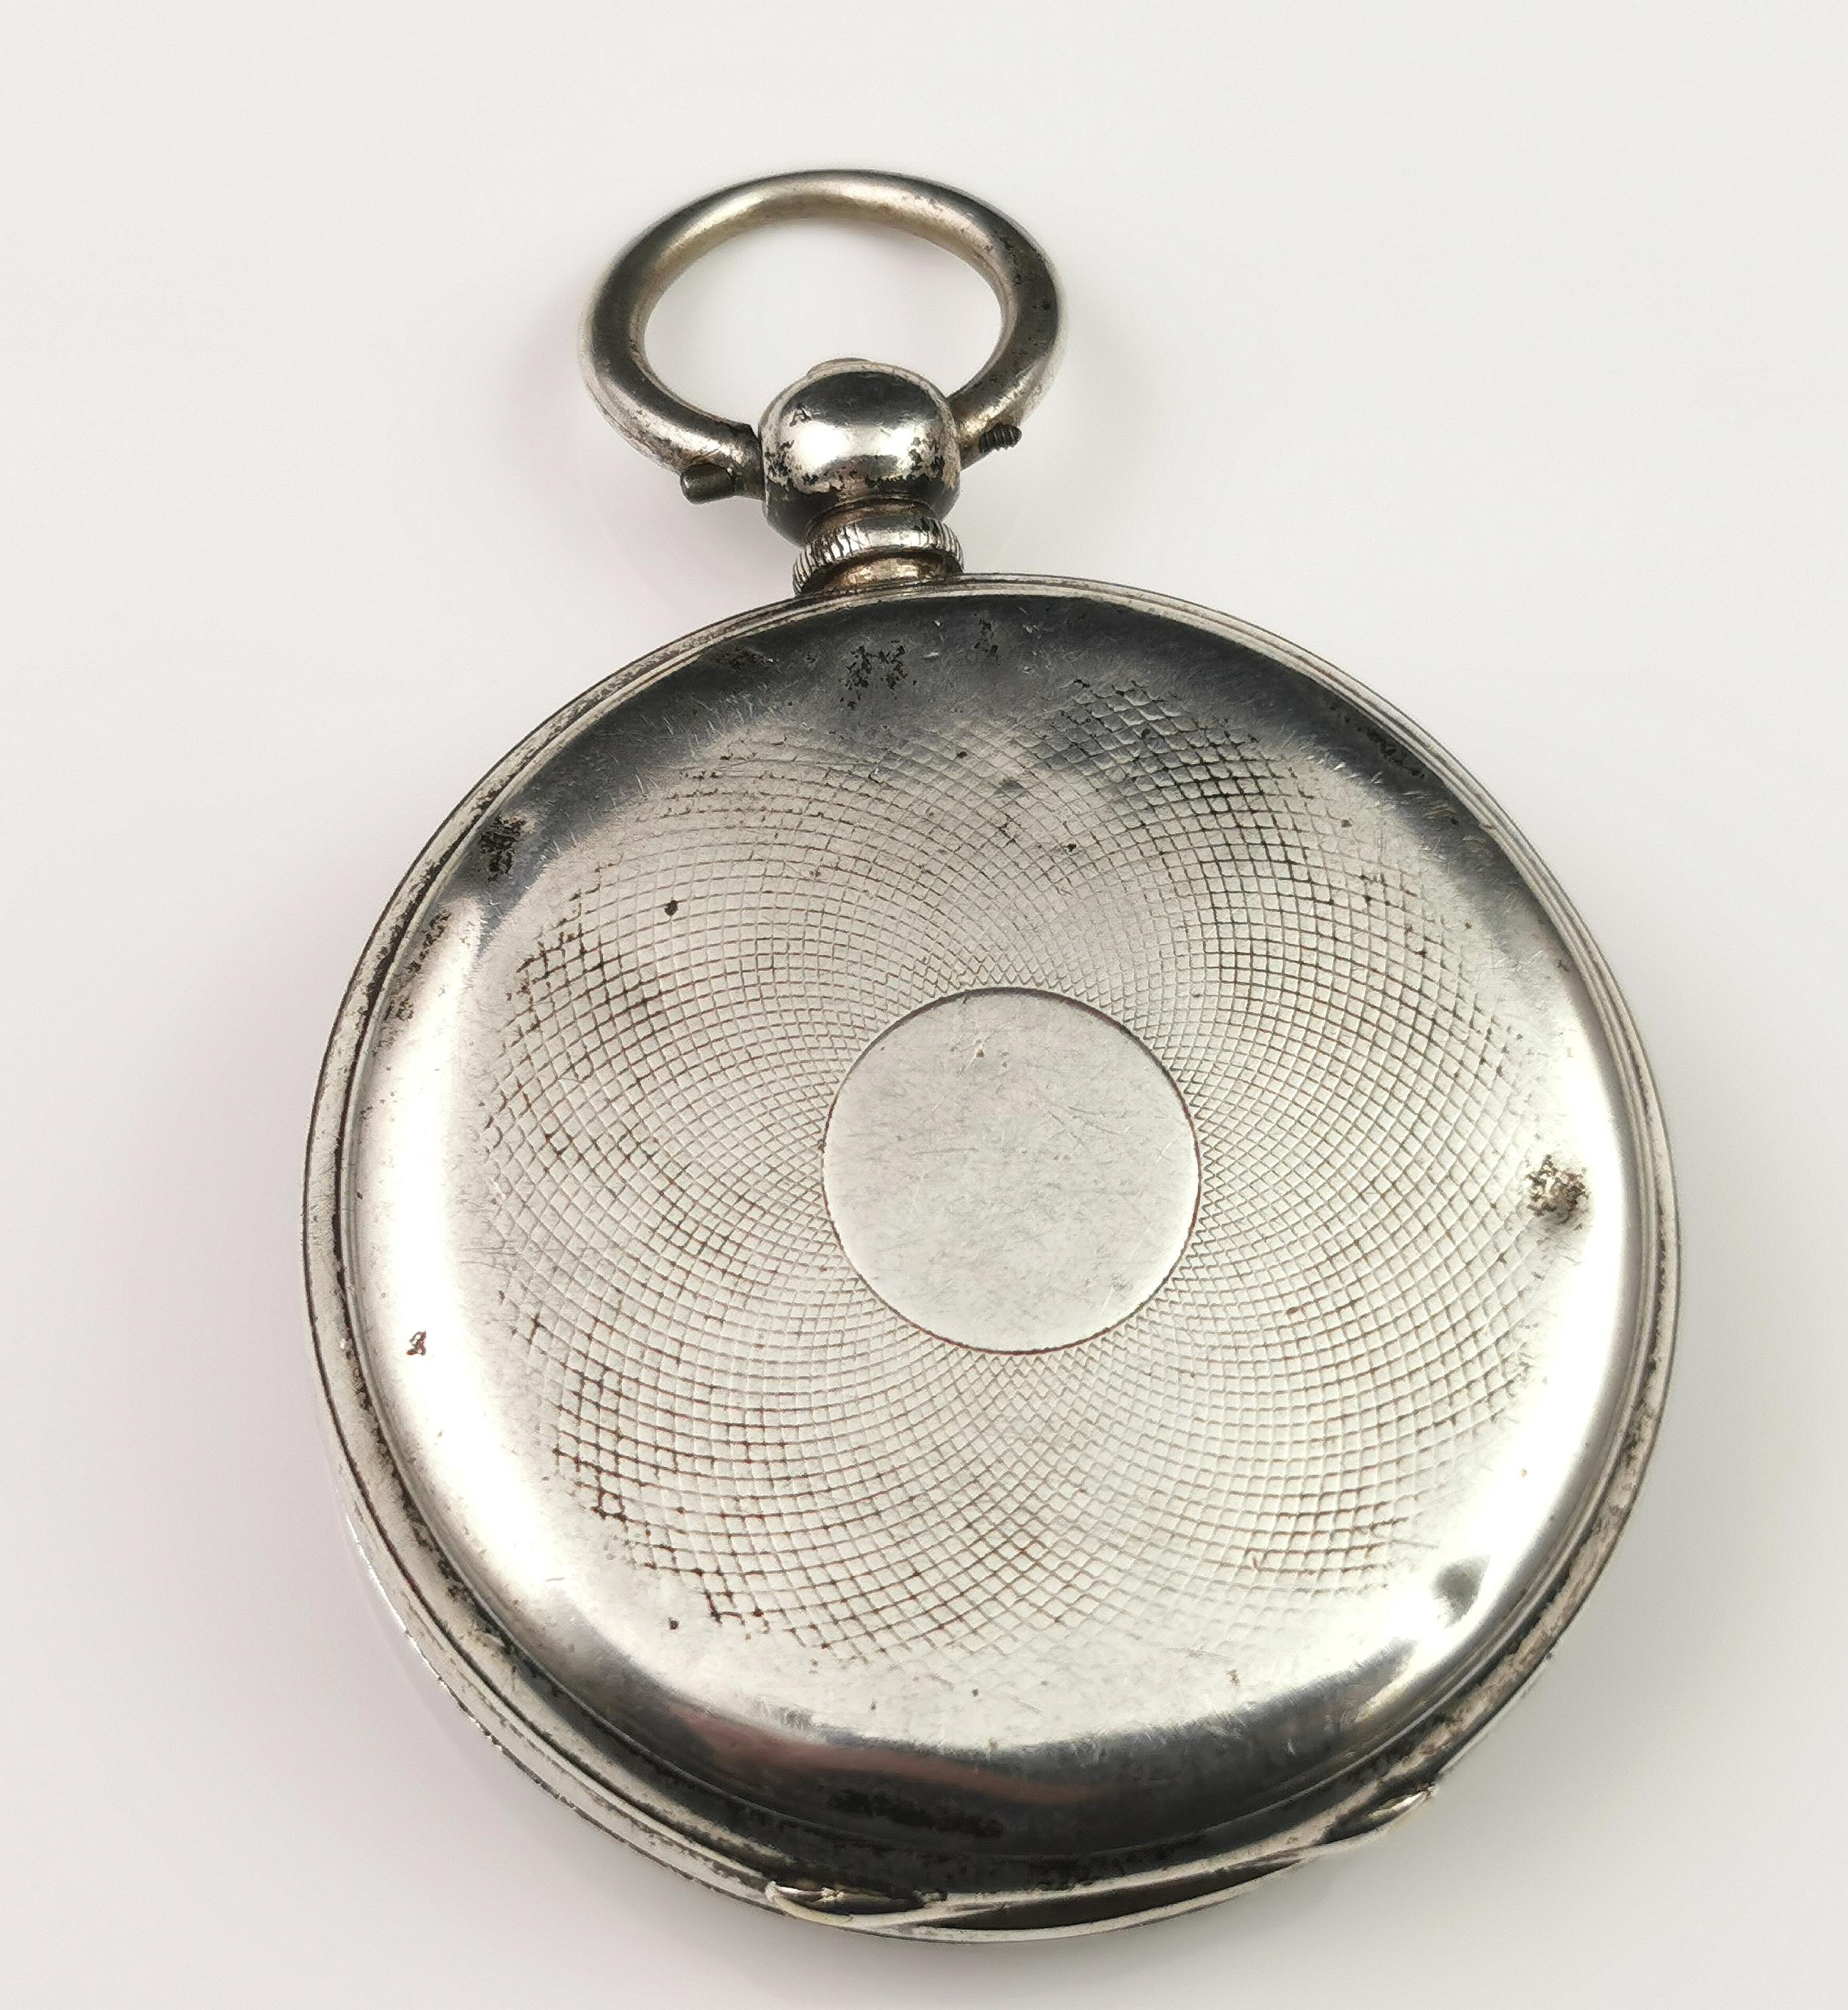 A handsome antique sterling silver cased pocket watch.

The case is fully hallmarked for sterling silver, 1884, Alfred Bedford for Waltham Watch company.

It has a white enamel dial with black roman numerals and blue steel hands, there is a